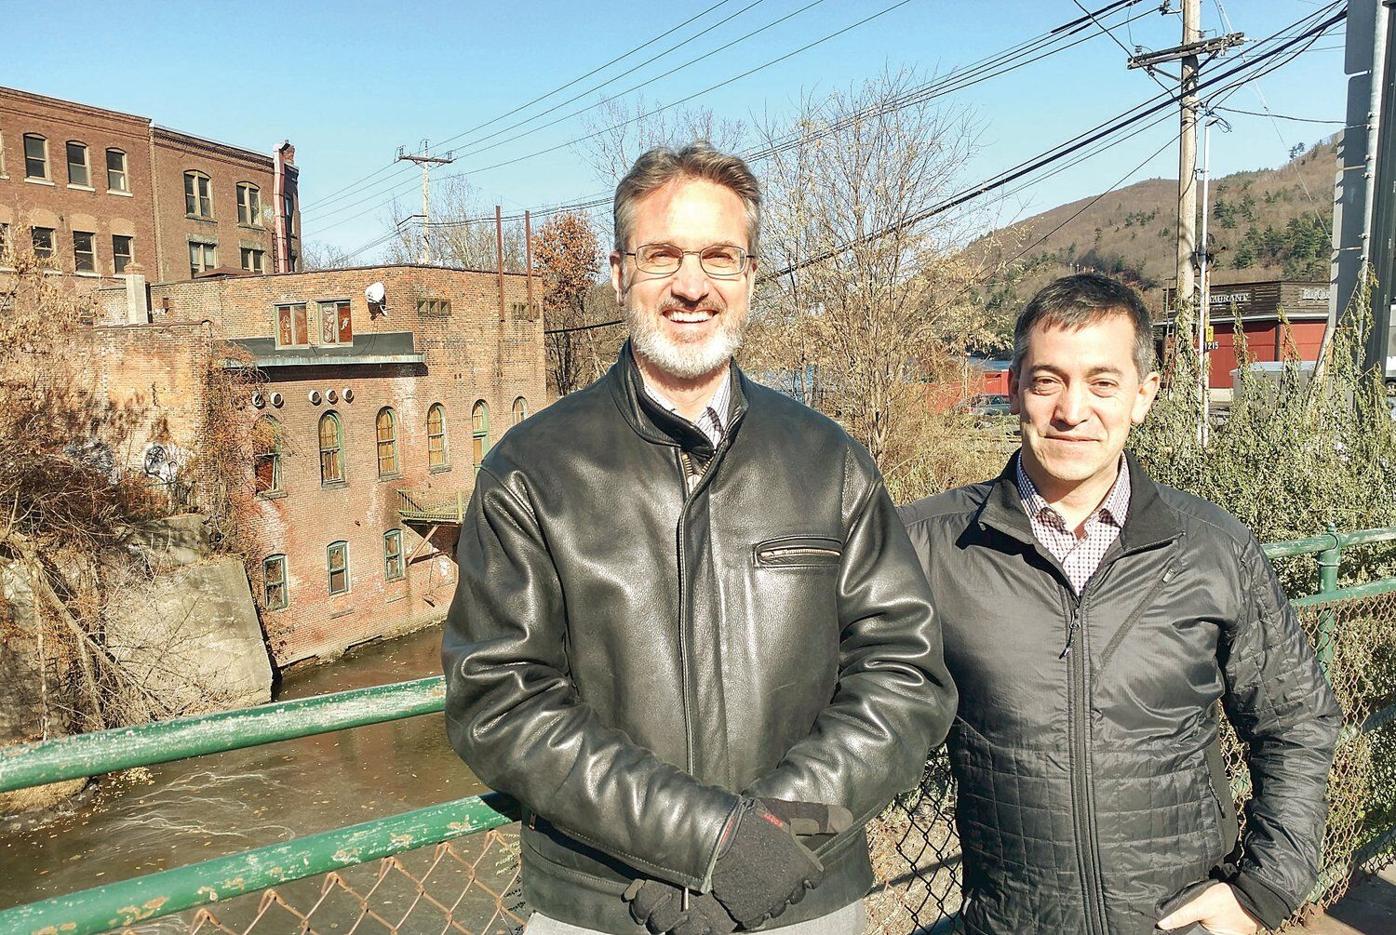 $30M project would bring new housing, museum space to downtown Brattleboro